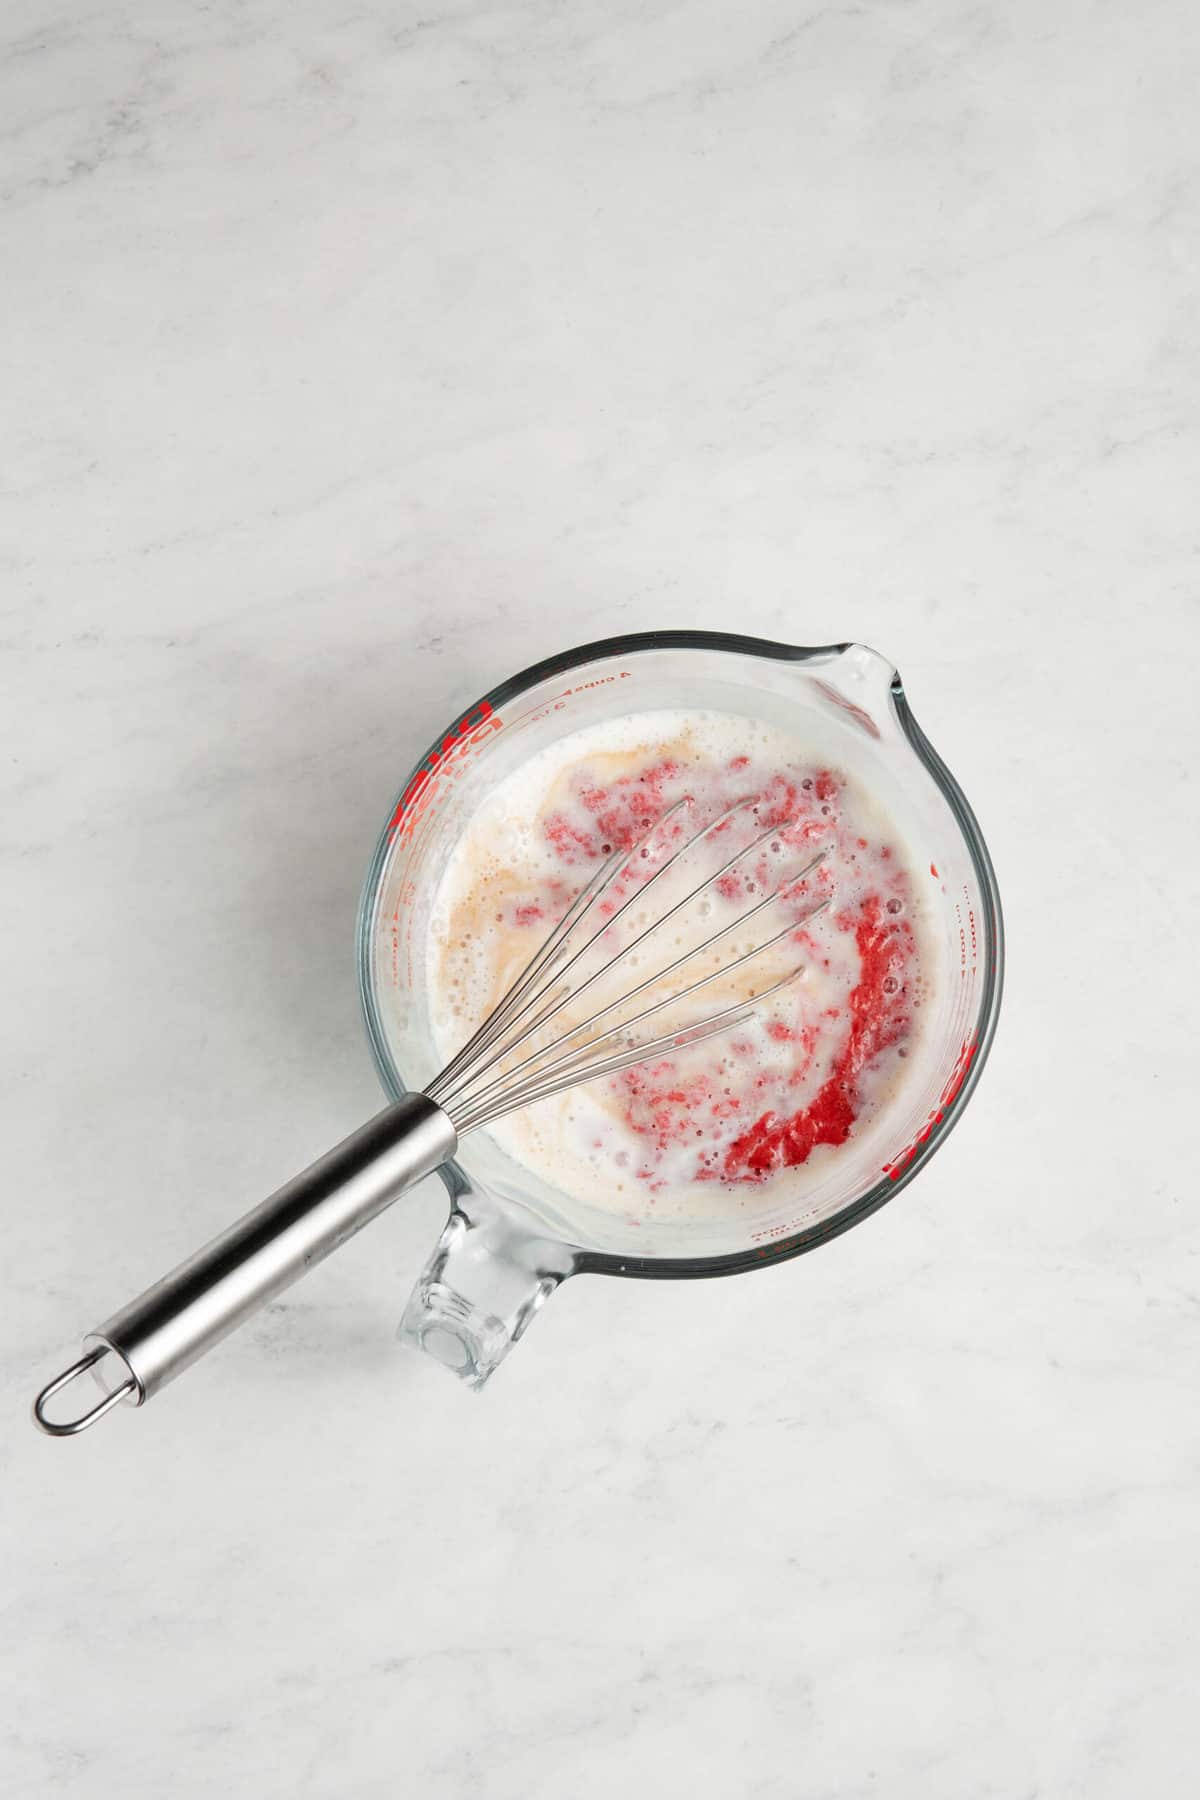 strawberry puree, egg whites, and buttermilk in a glass measuring cup.